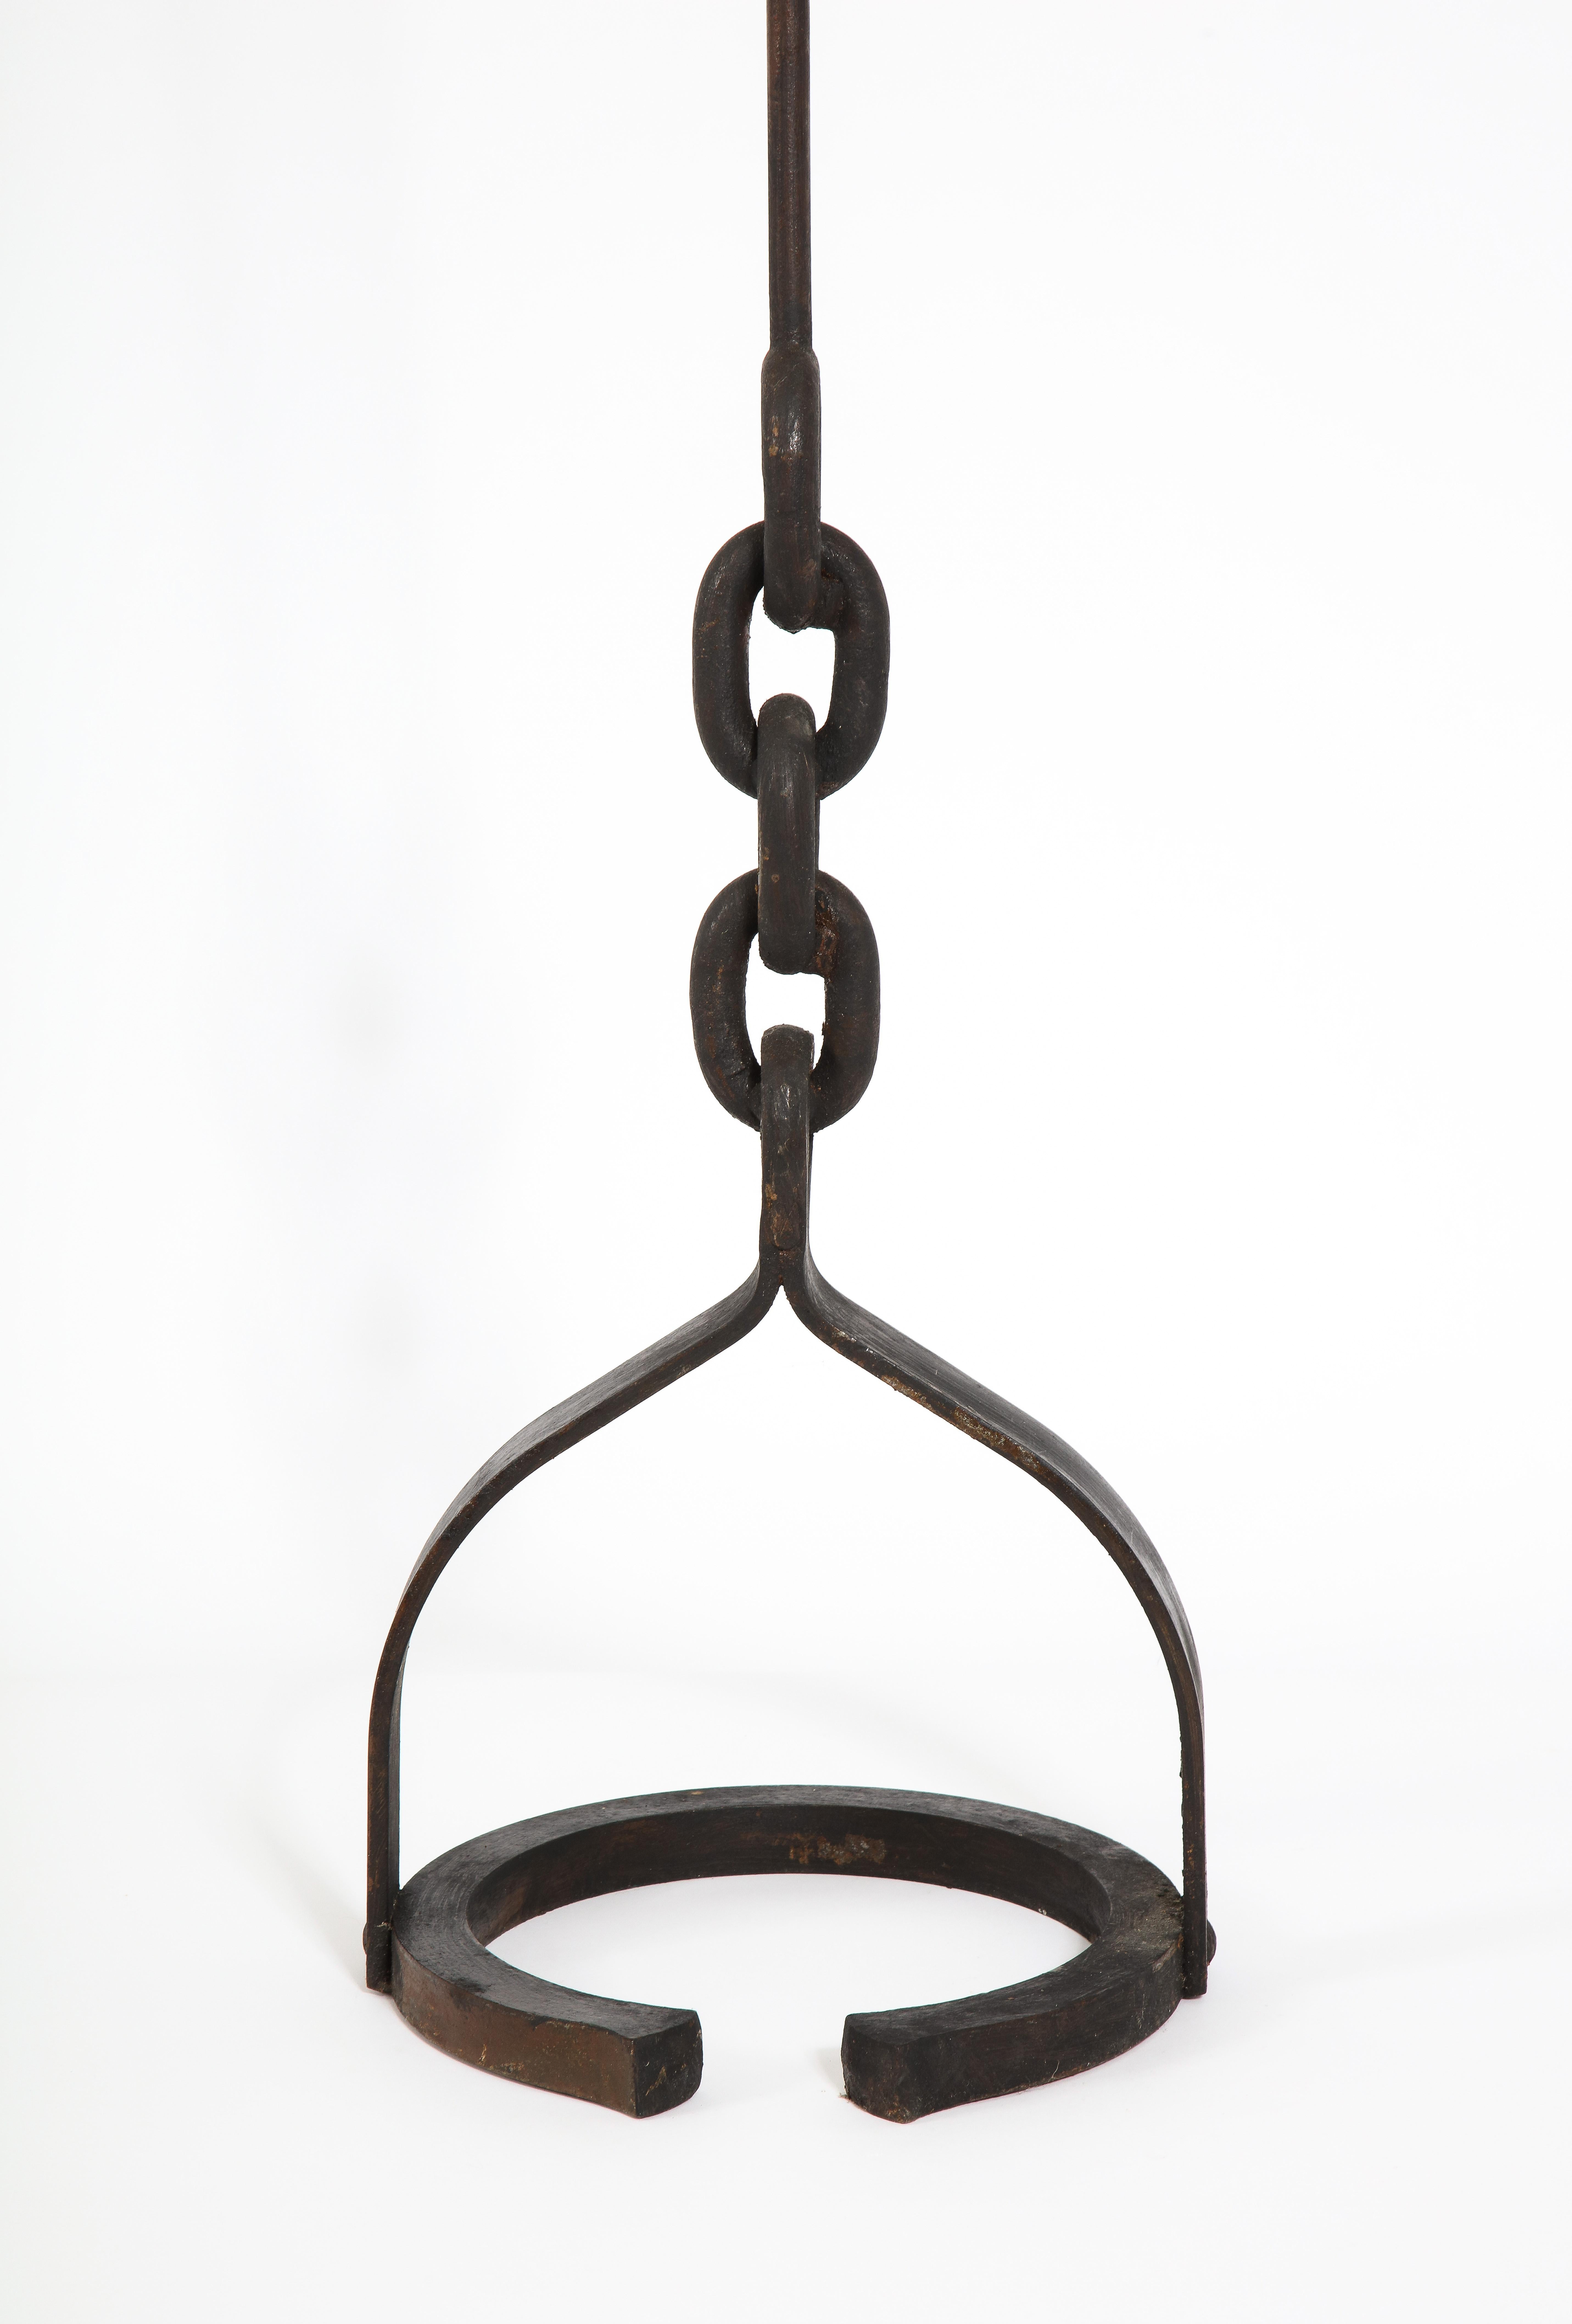 Classic Wrought Iron Chain Motif Table Lamp, France 1960's For Sale 1